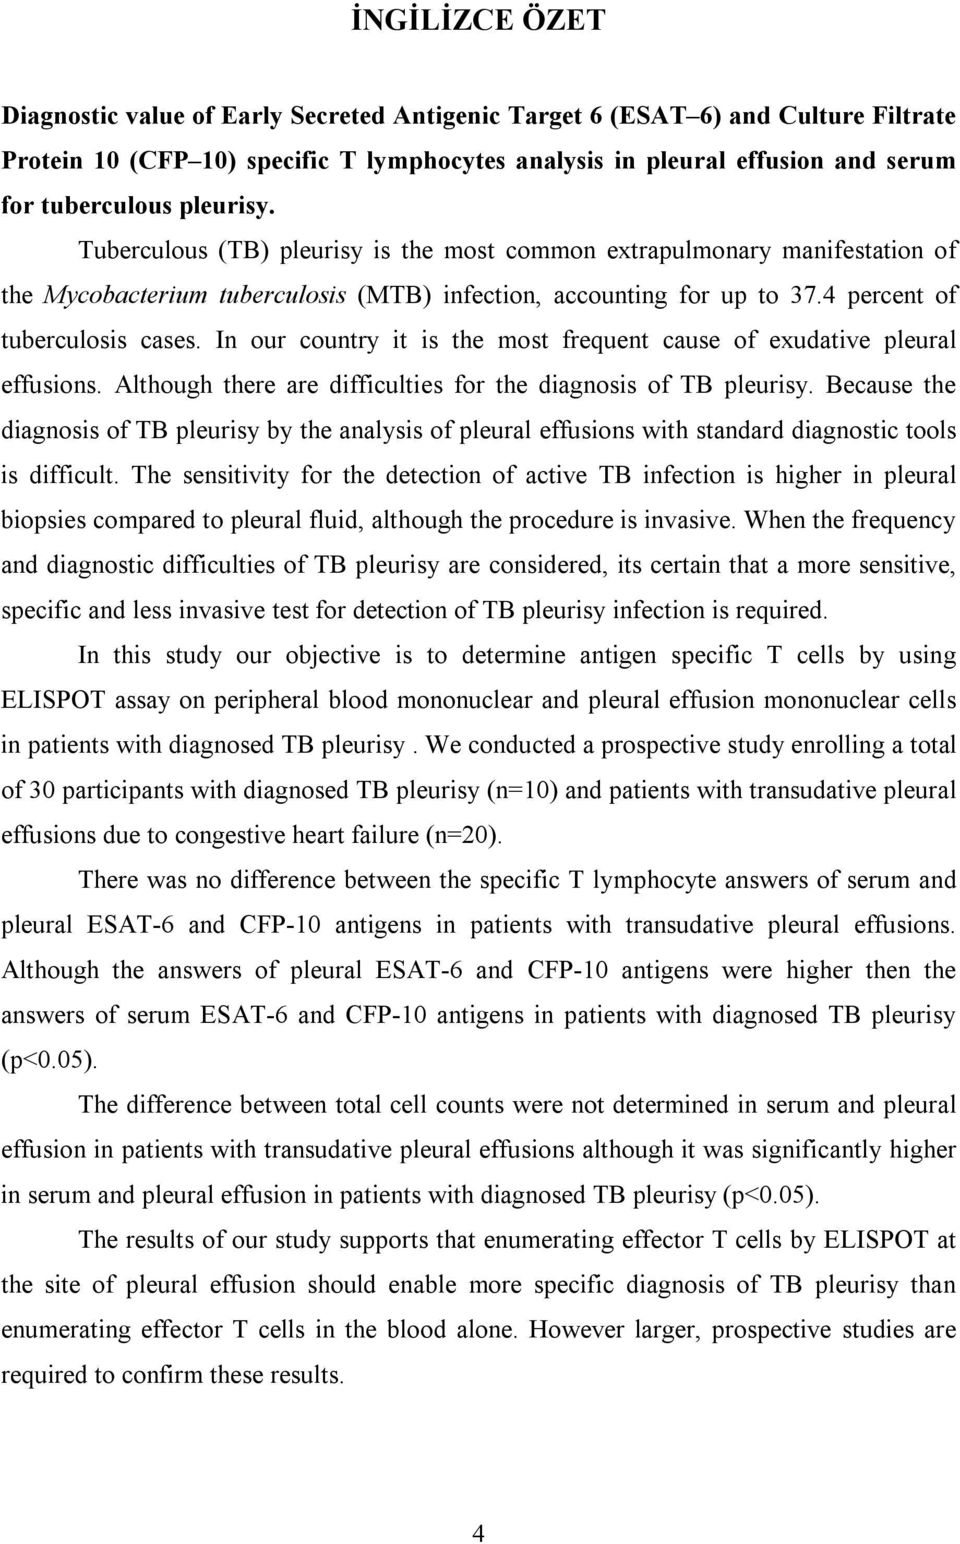 In our country it is the most frequent cause of exudative pleural effusions. Although there are difficulties for the diagnosis of TB pleurisy.